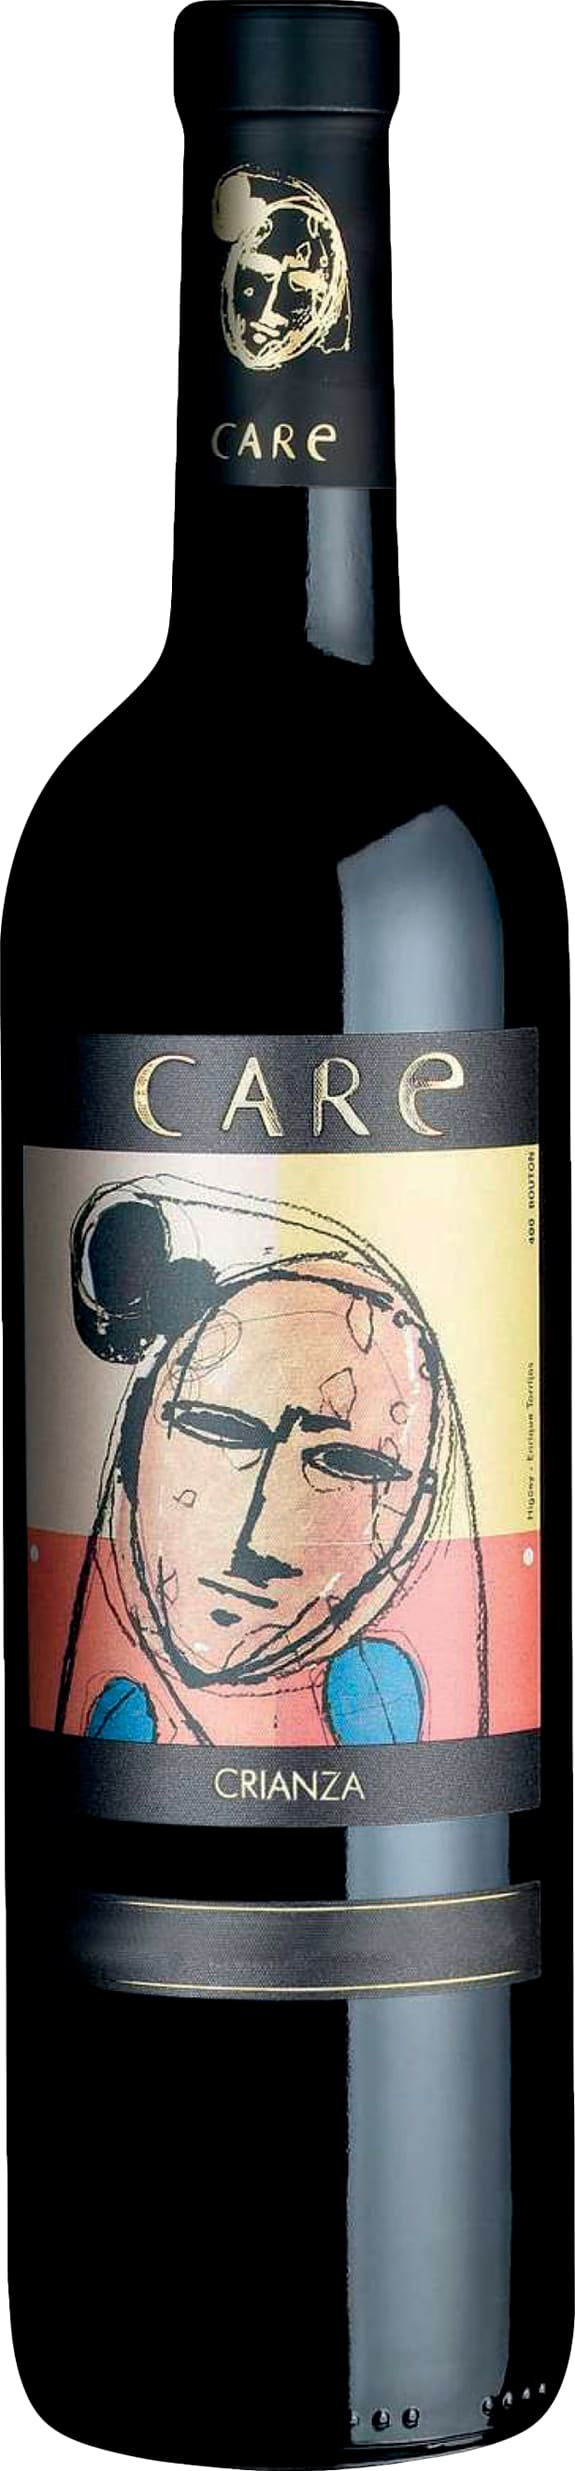 Care Crianza 2020 75cl - Buy Care Wines from GREAT WINES DIRECT wine shop